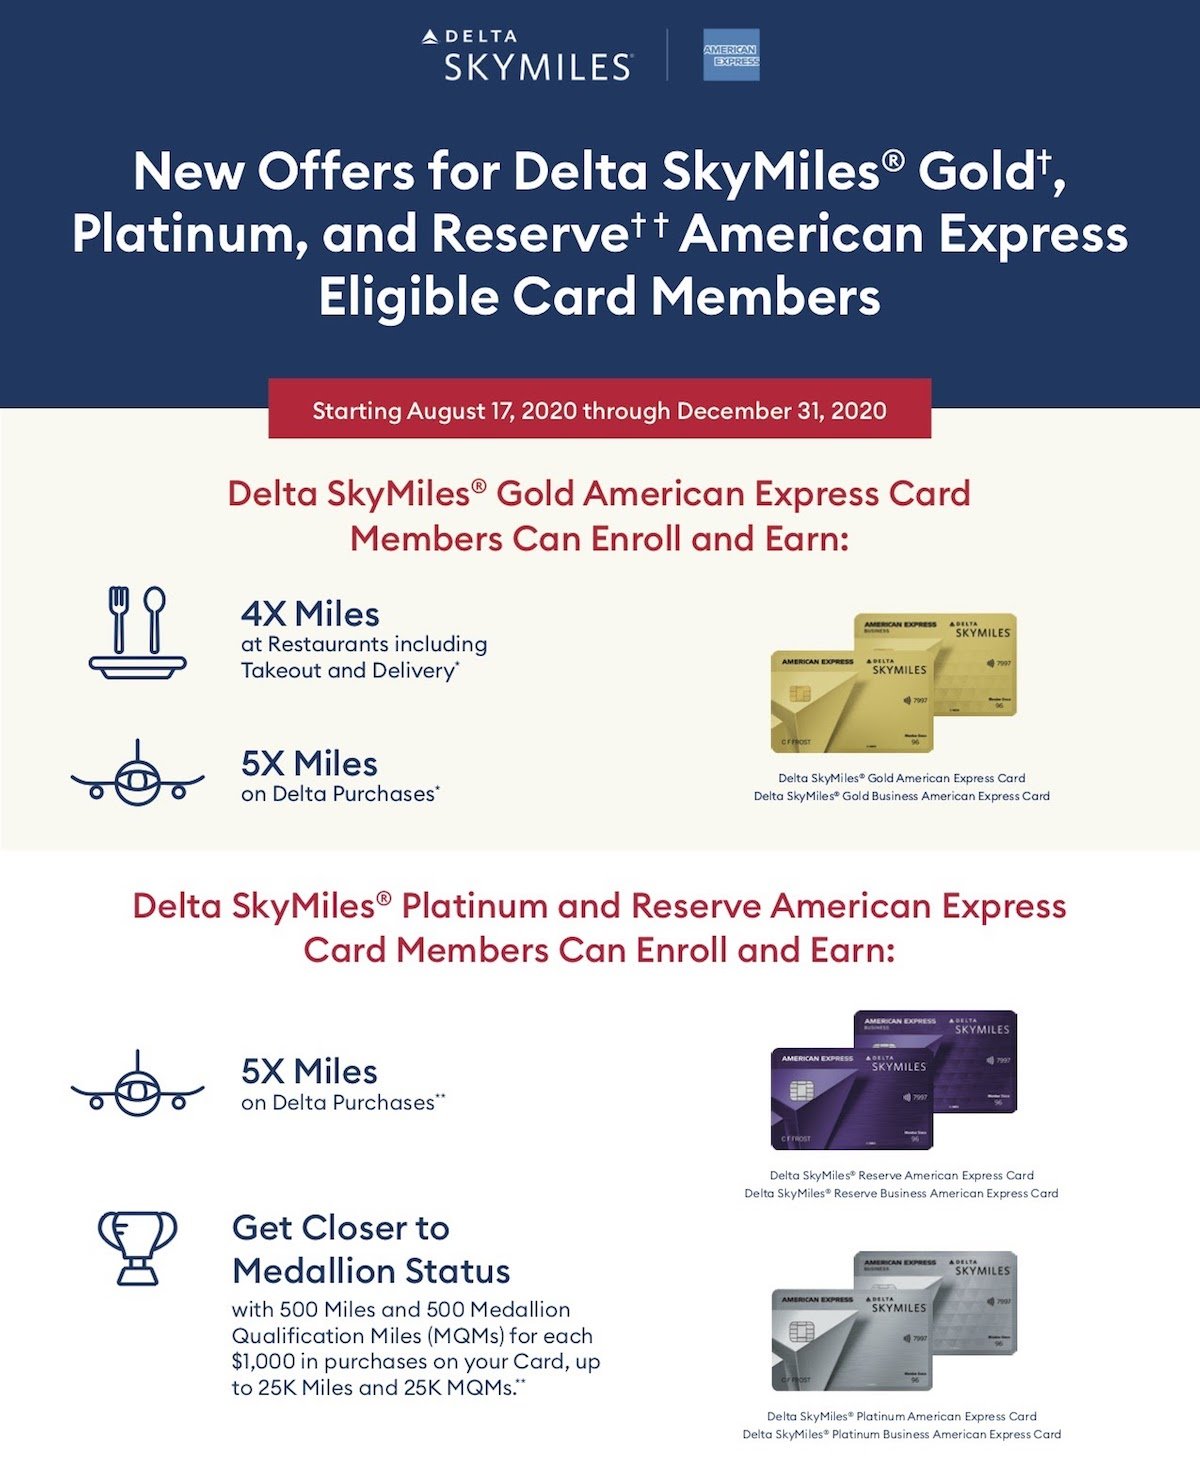 10. Earn More Miles: Earn 3 Miles for Every Dollar Spent on Eligible Delta Purchases and Hotels.